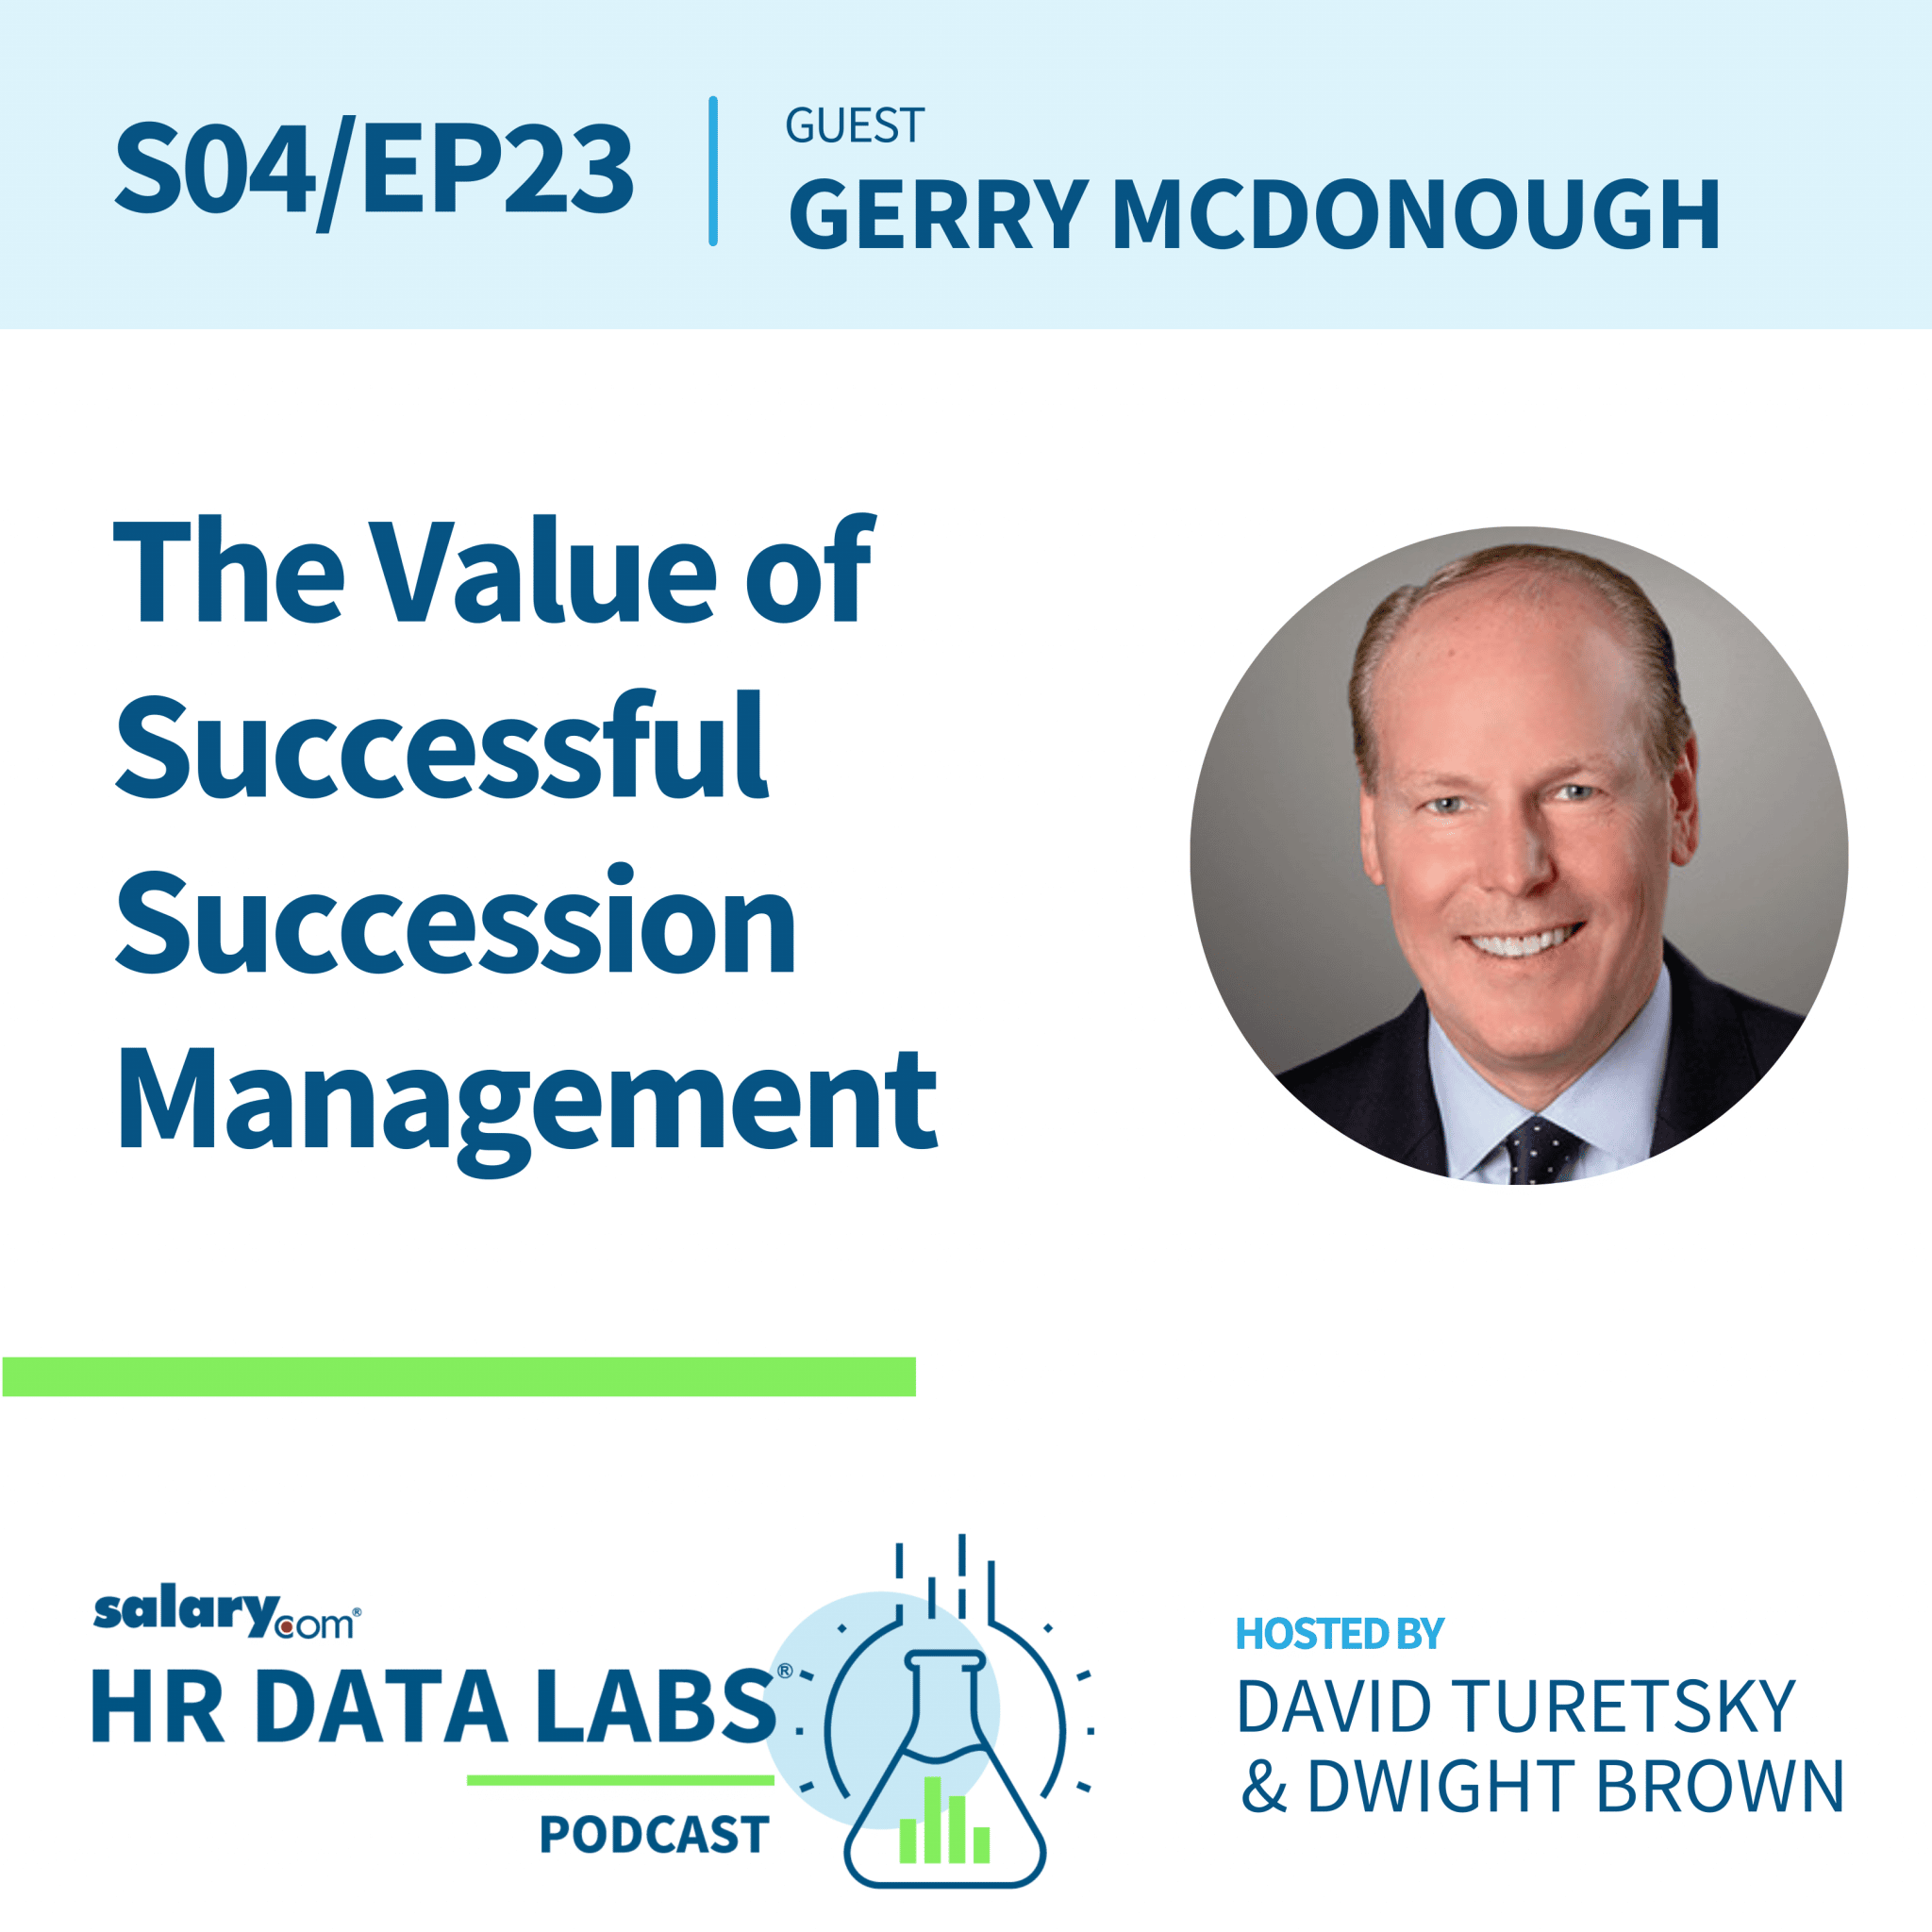 Gerry McDonough – The Value of Successful Succession Management